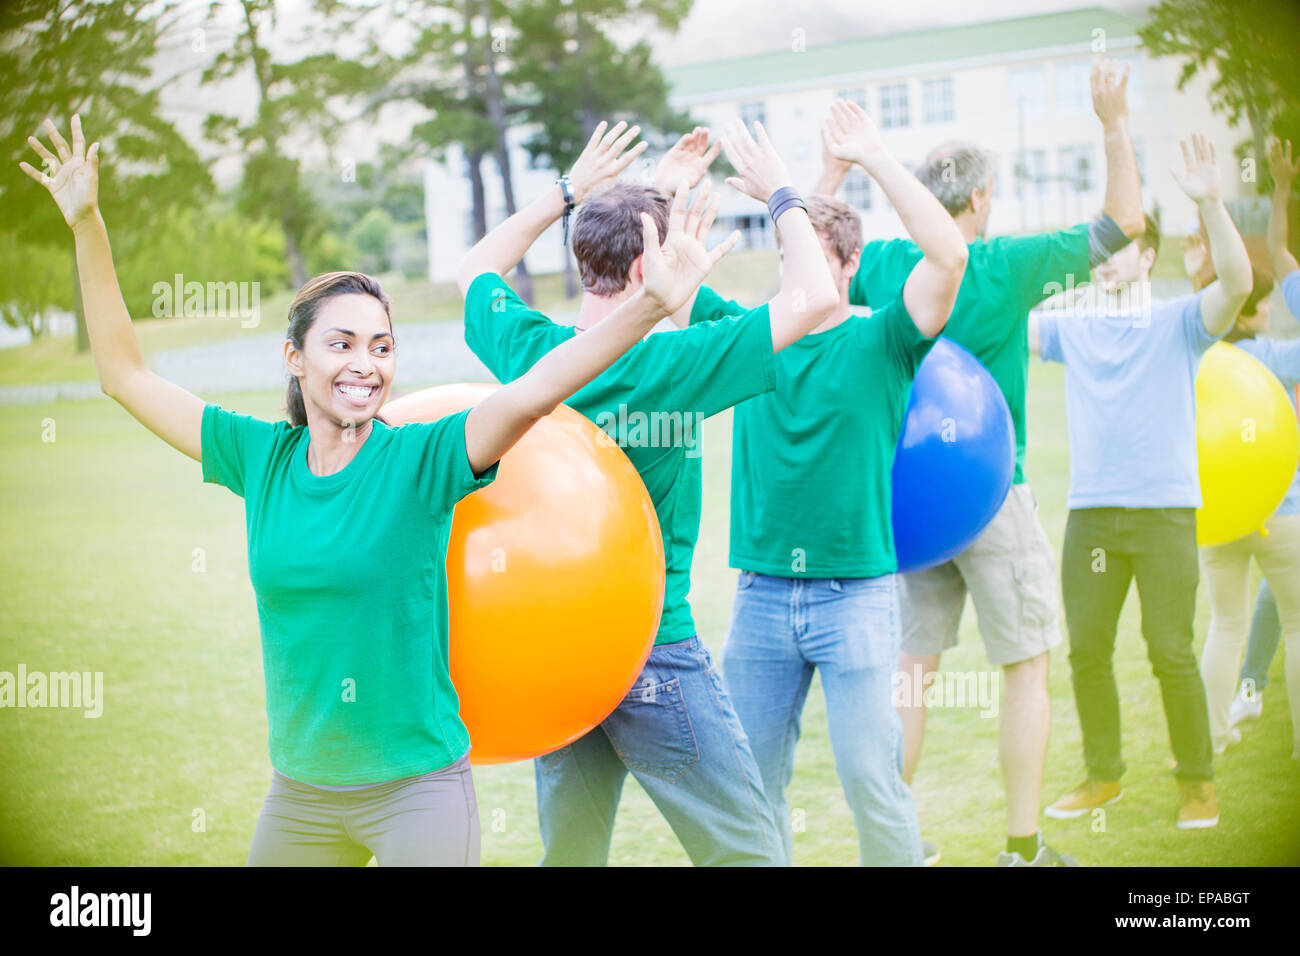 performing fitness ball team building activity Stock Photo